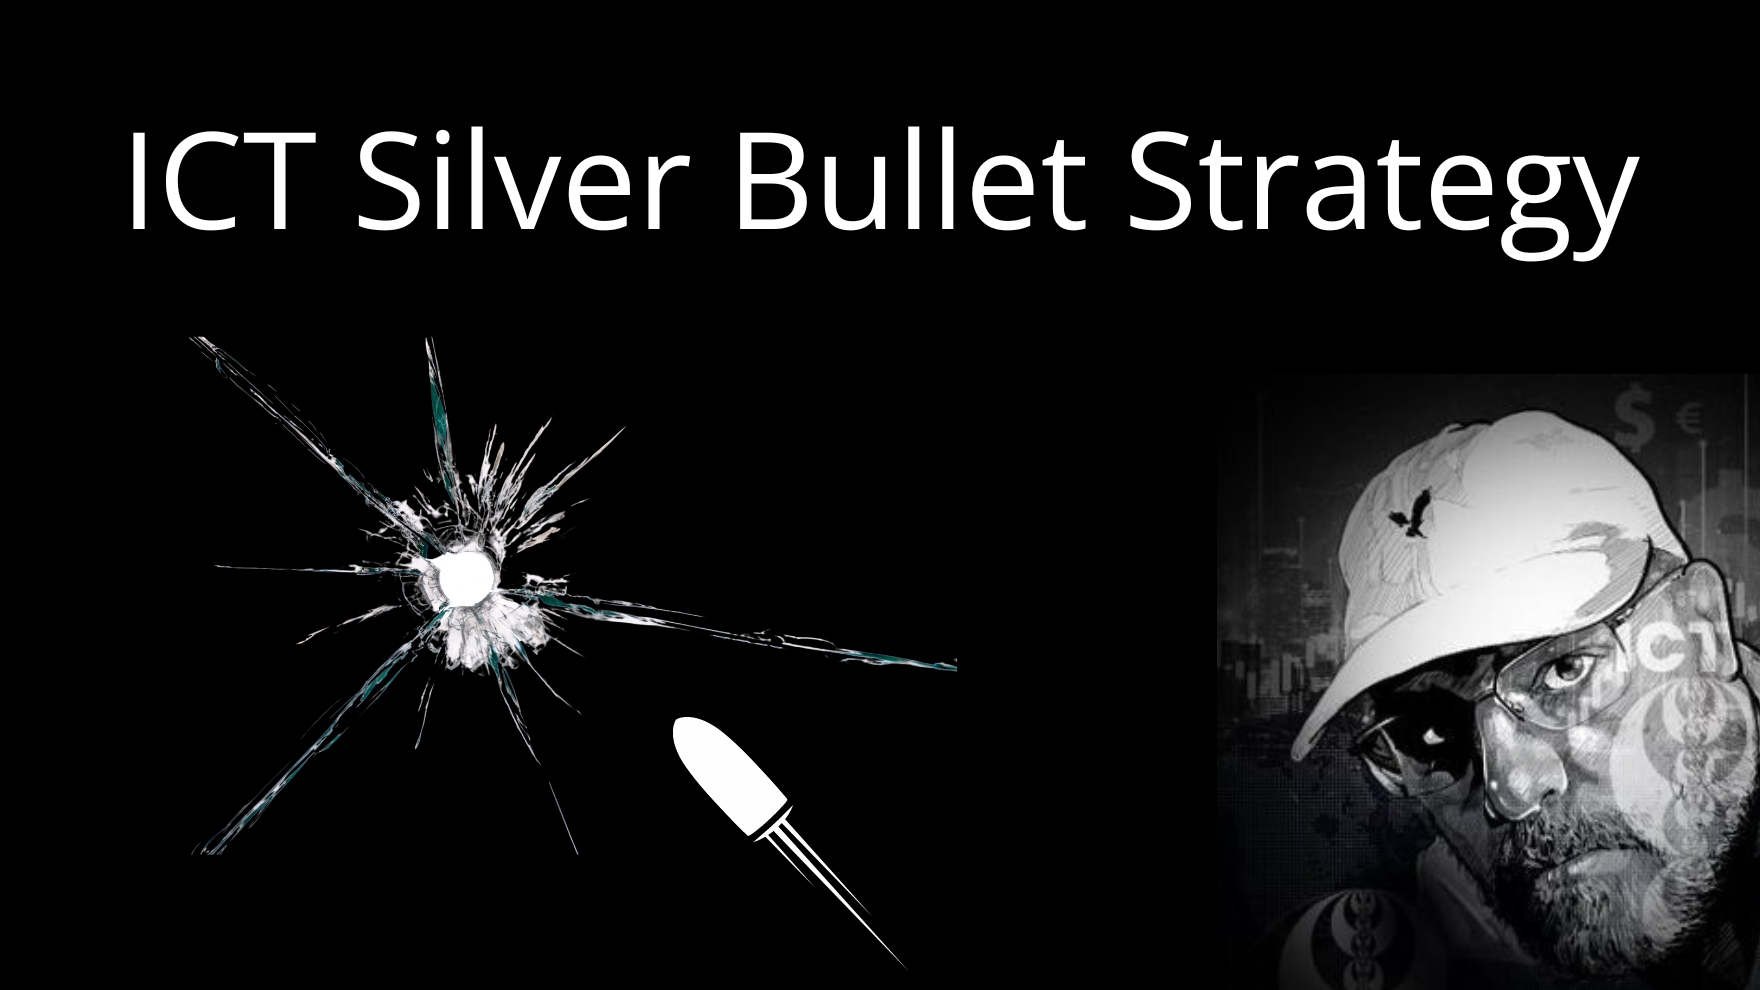 ict-silver-bullet-trading-strategy